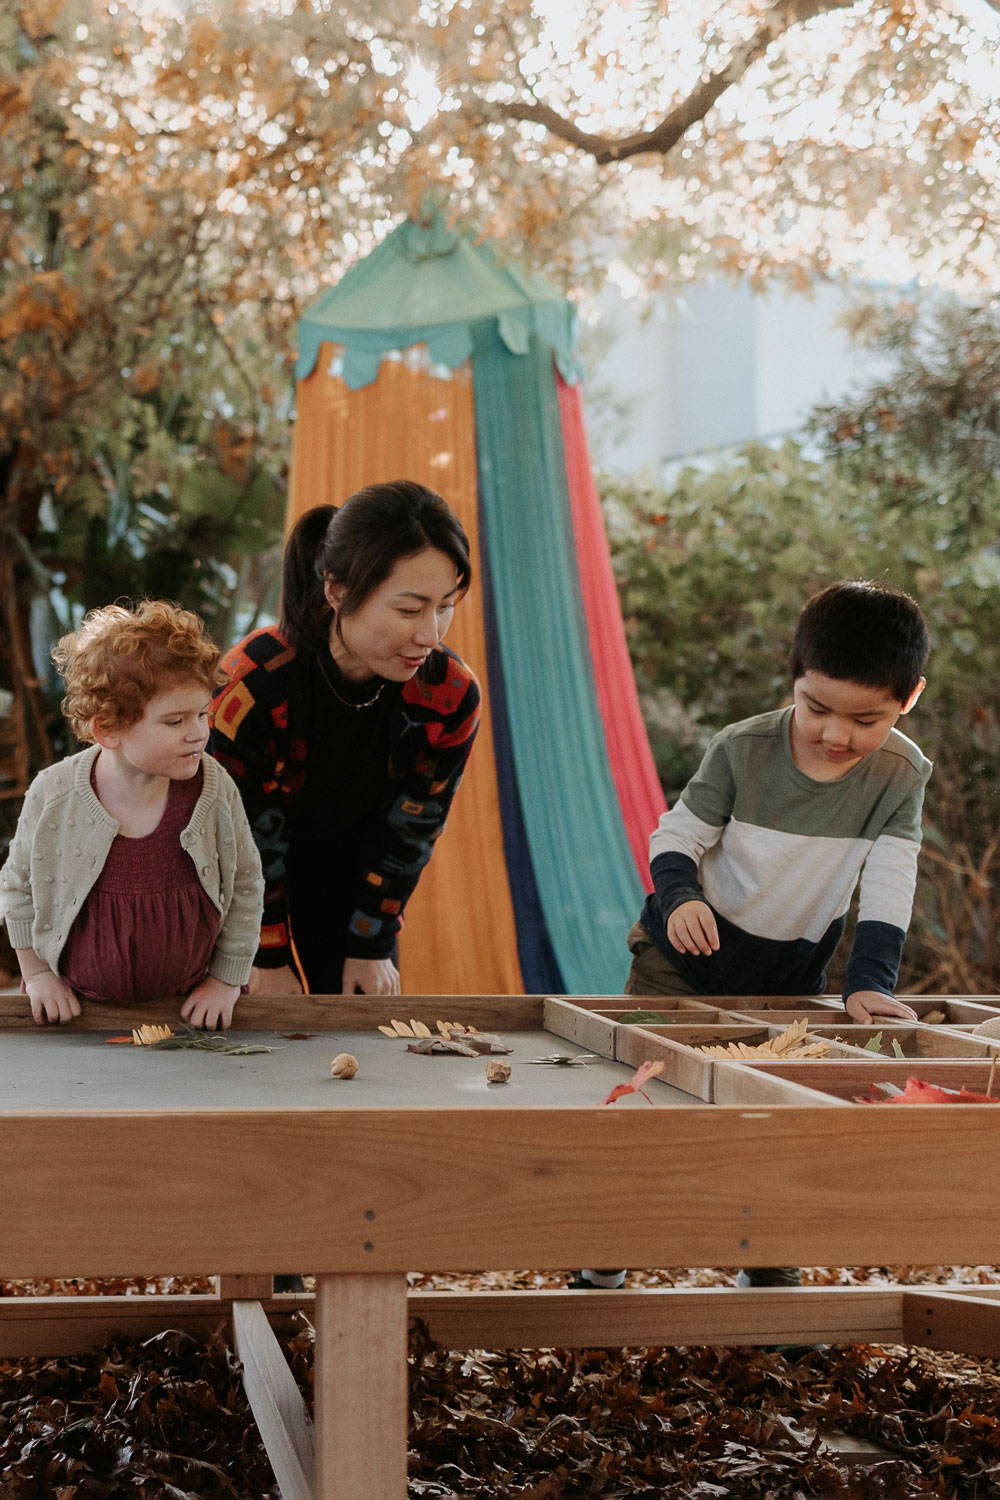 Woman Nuturing Children Engaged in Sensory Play at the Sensory Play Table